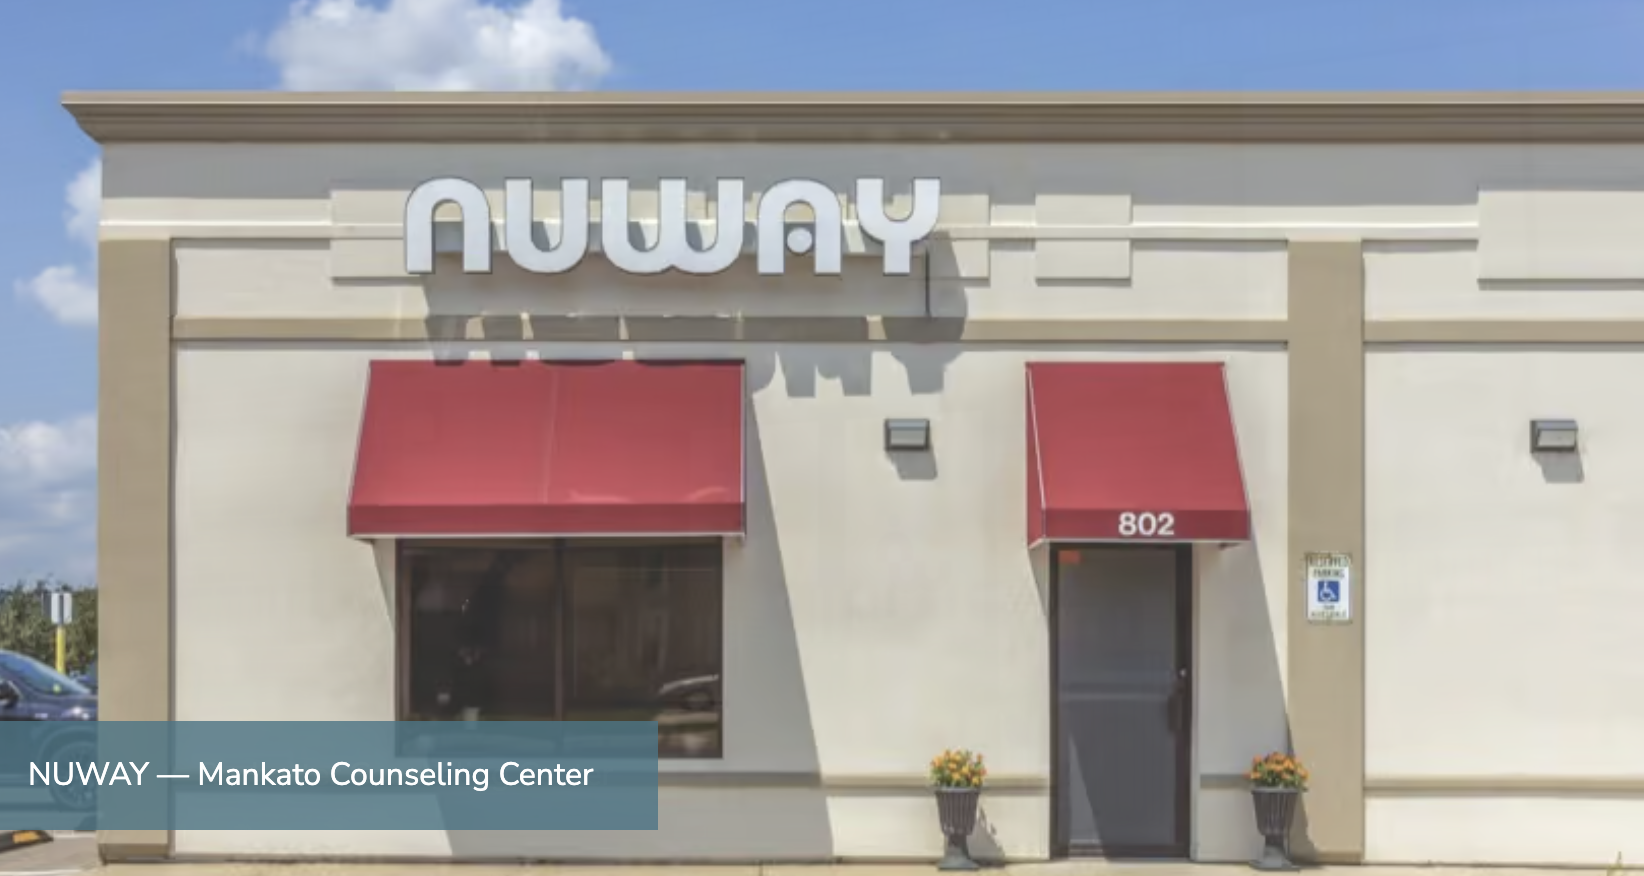 Nuway Mankato Counseling Center